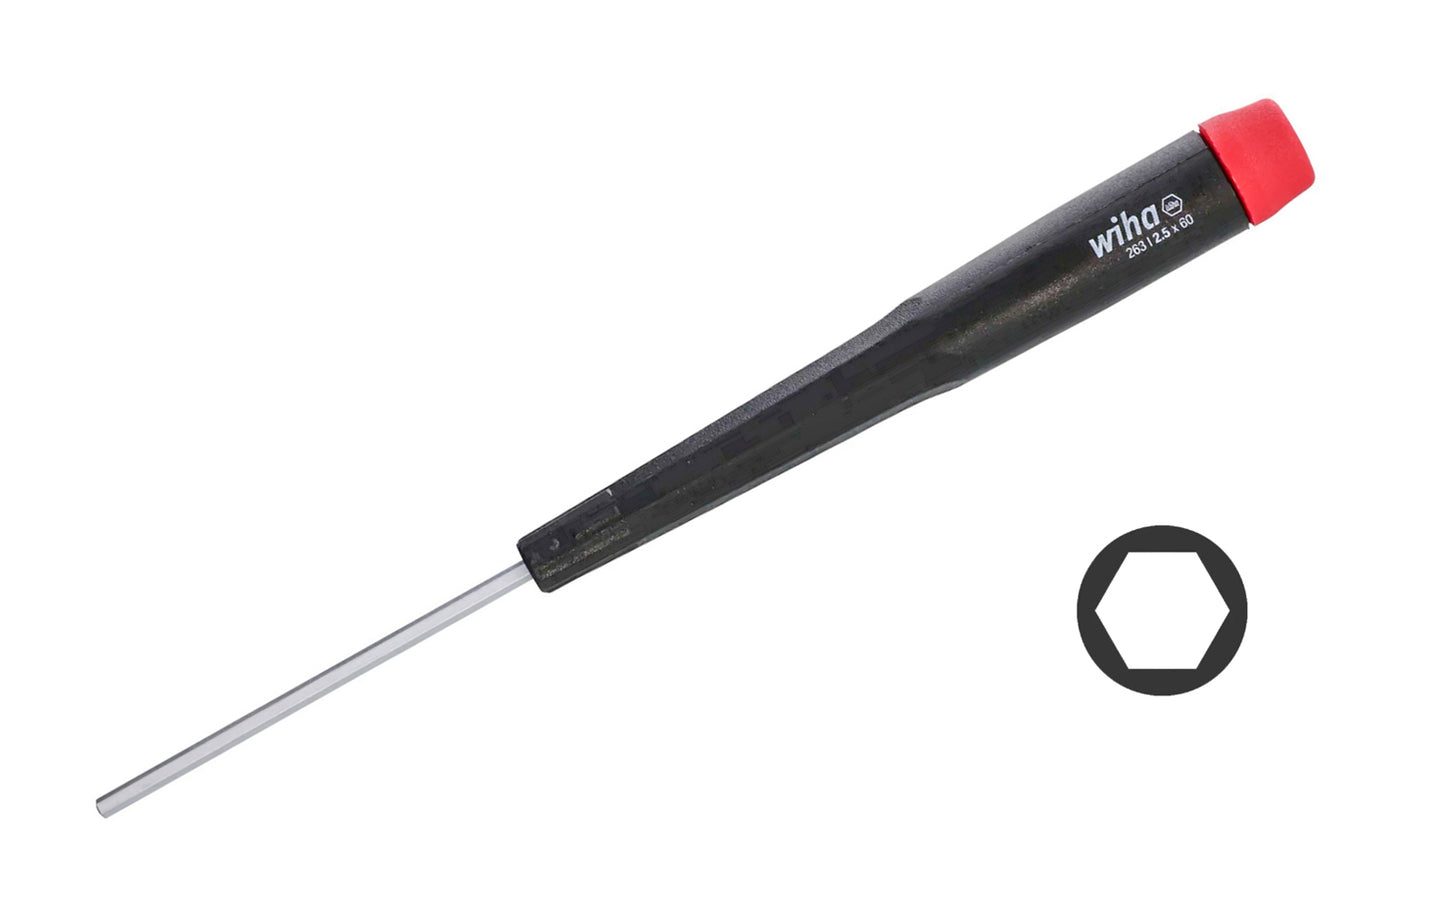 A high quality Wiha hex precision screwdriver made out of hardened CRM72 tool steel. The classic precision style screwdriver has a hex profile finger grip for precise torque, a tapered handle, & a smooth-turning cap for rapid rotation.    Made in Germany.